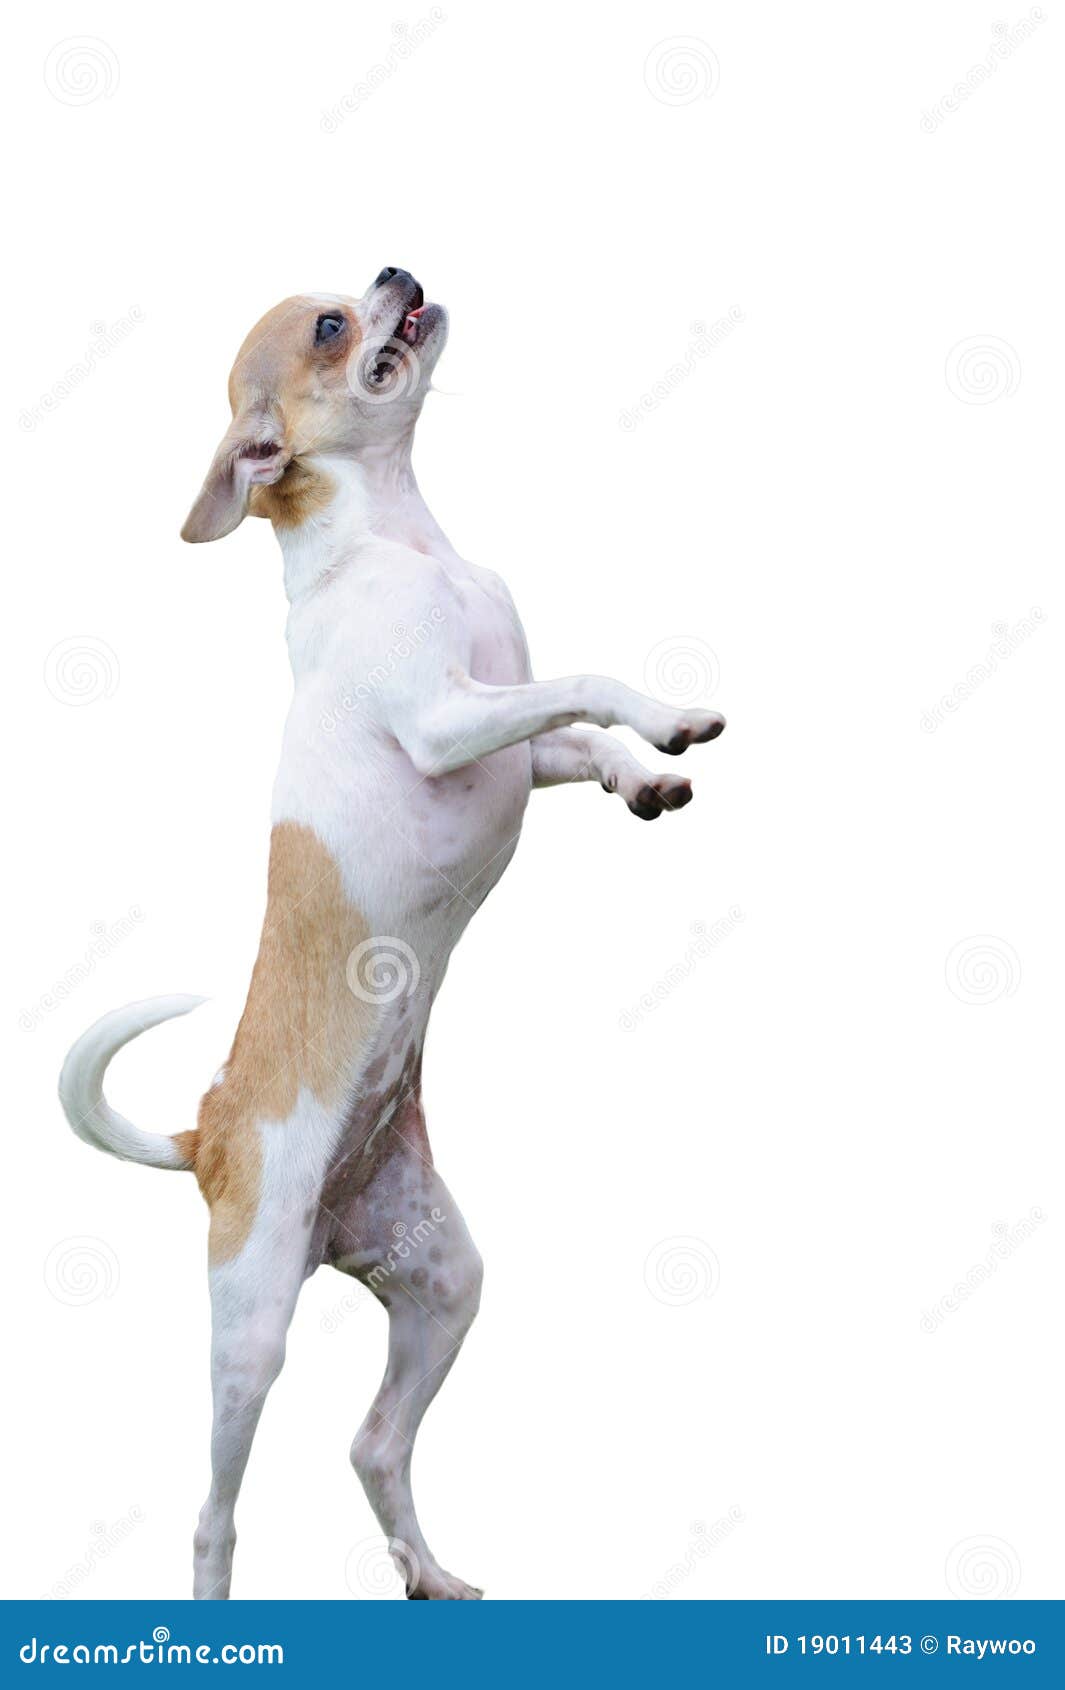 Chihuahua dog standing stock image. Image of breed